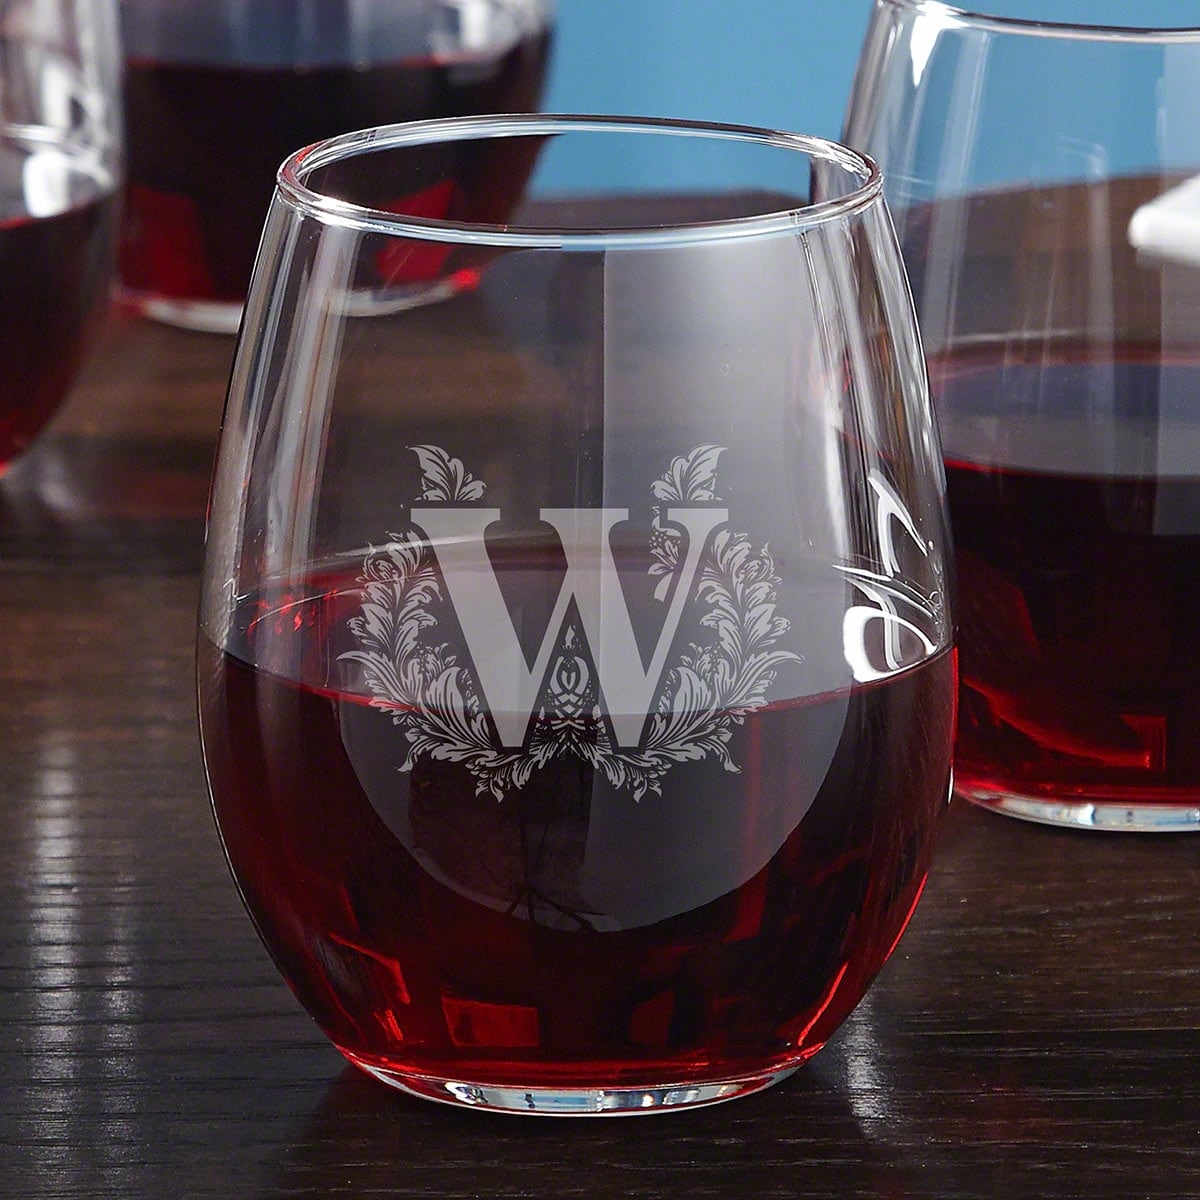 Personalized Marquis by Waterford Moments Red Wine Glasses Set of 4